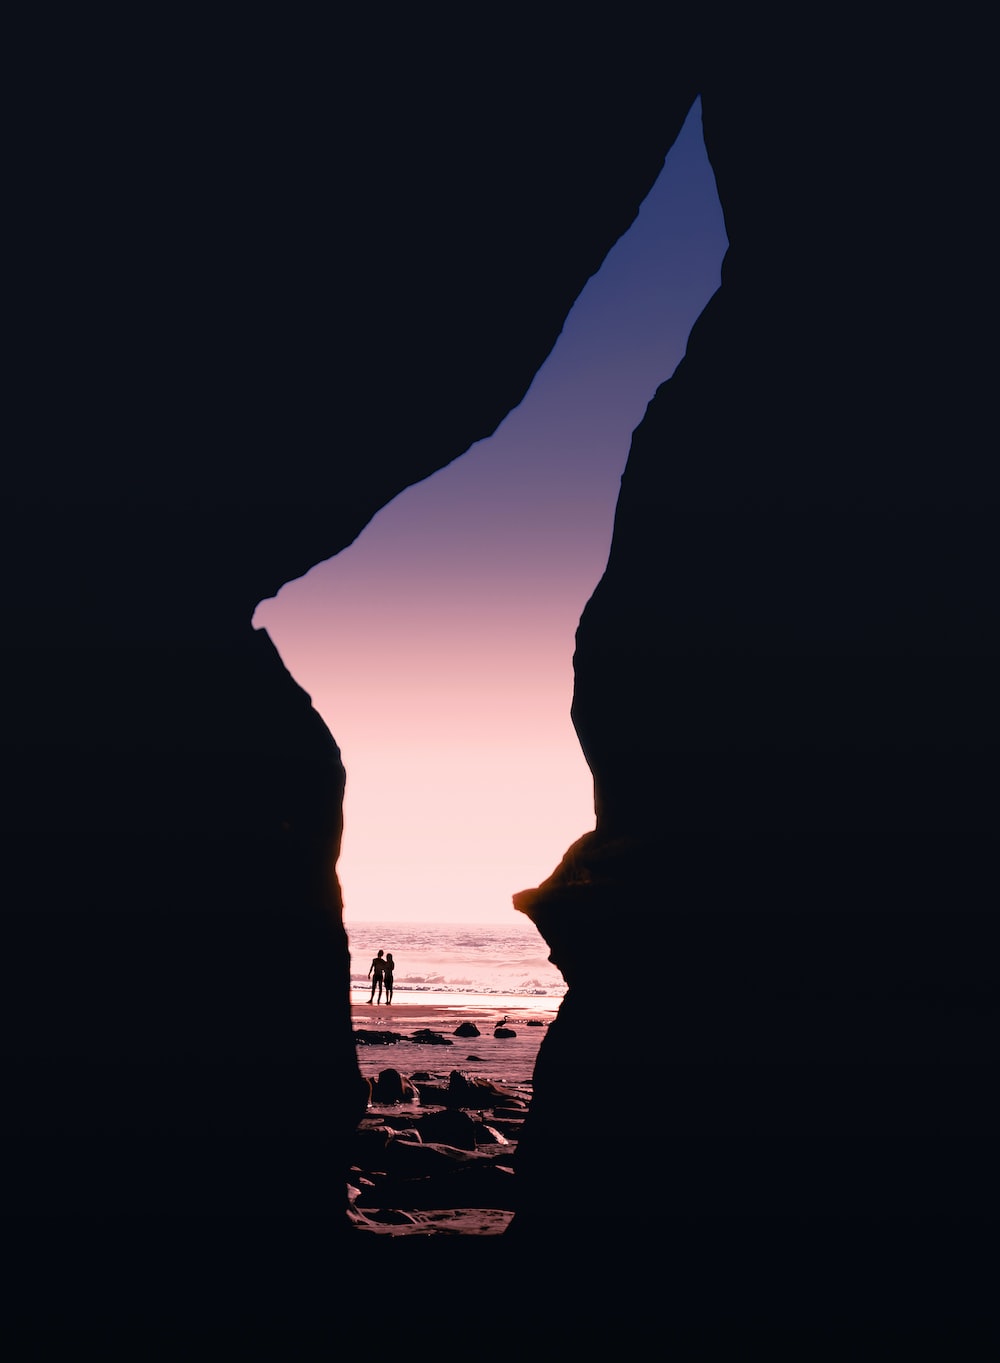 A couple standing on a beach at sunset, framed by a large rock formation. - Nature